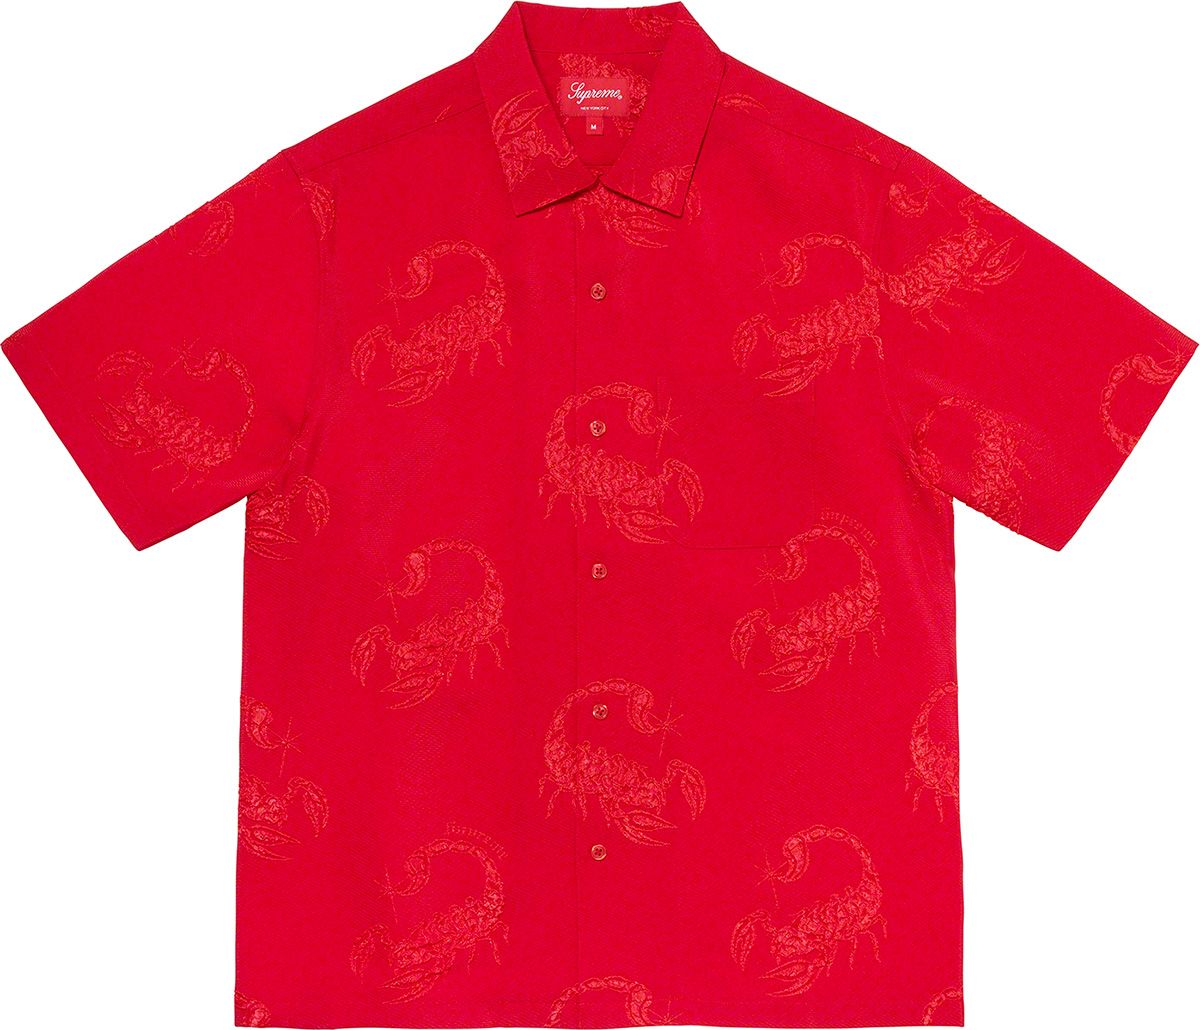 Beetle S/S Shirt - Spring/Summer 2021 Preview – Supreme